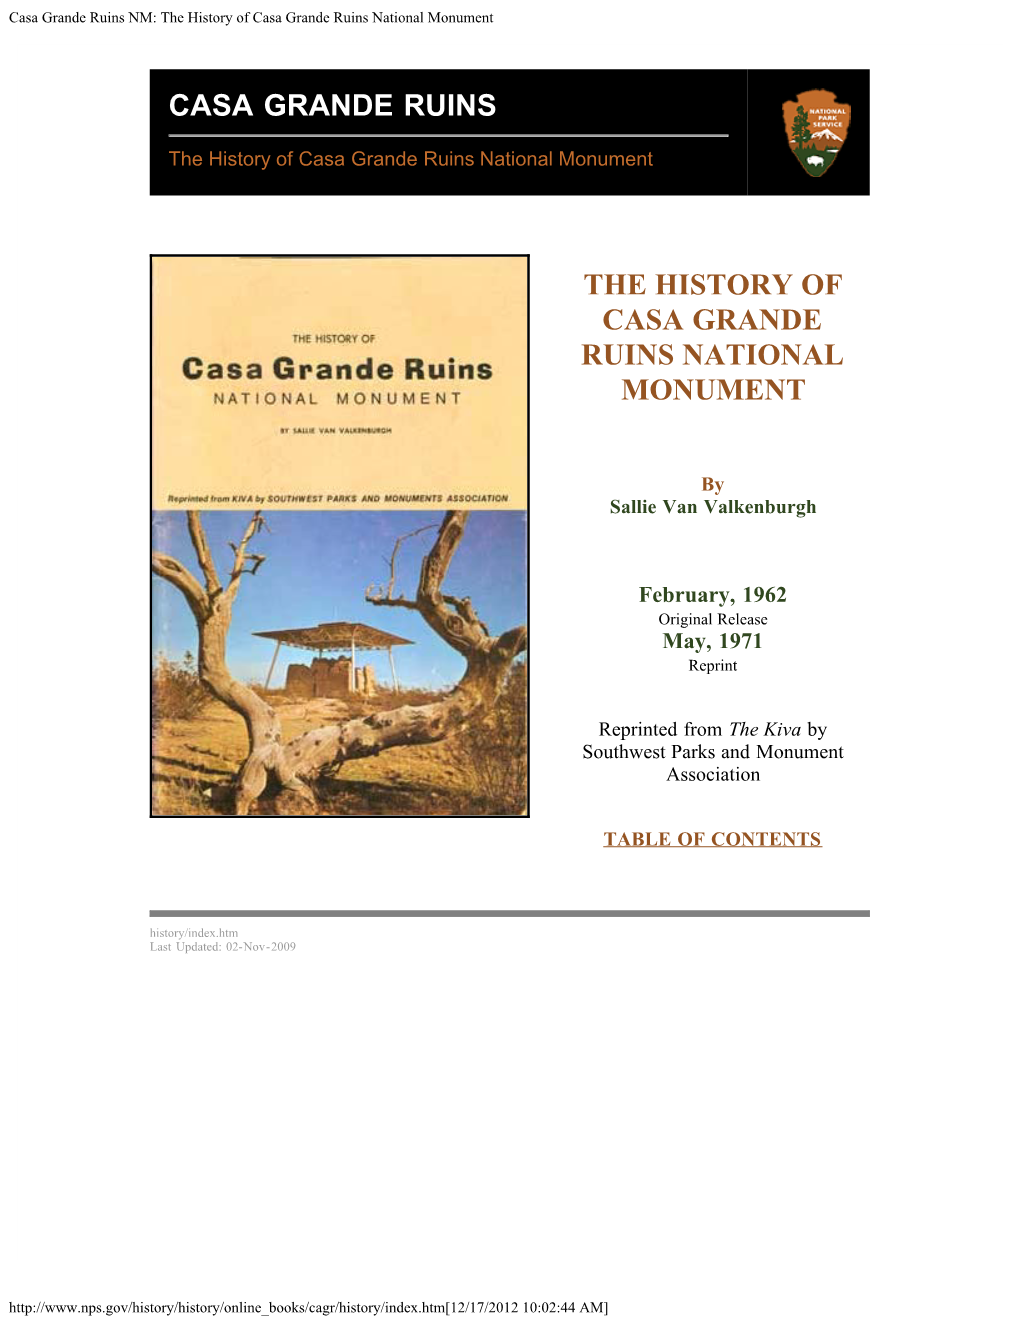 The History of Casa Grande Ruins National Monument